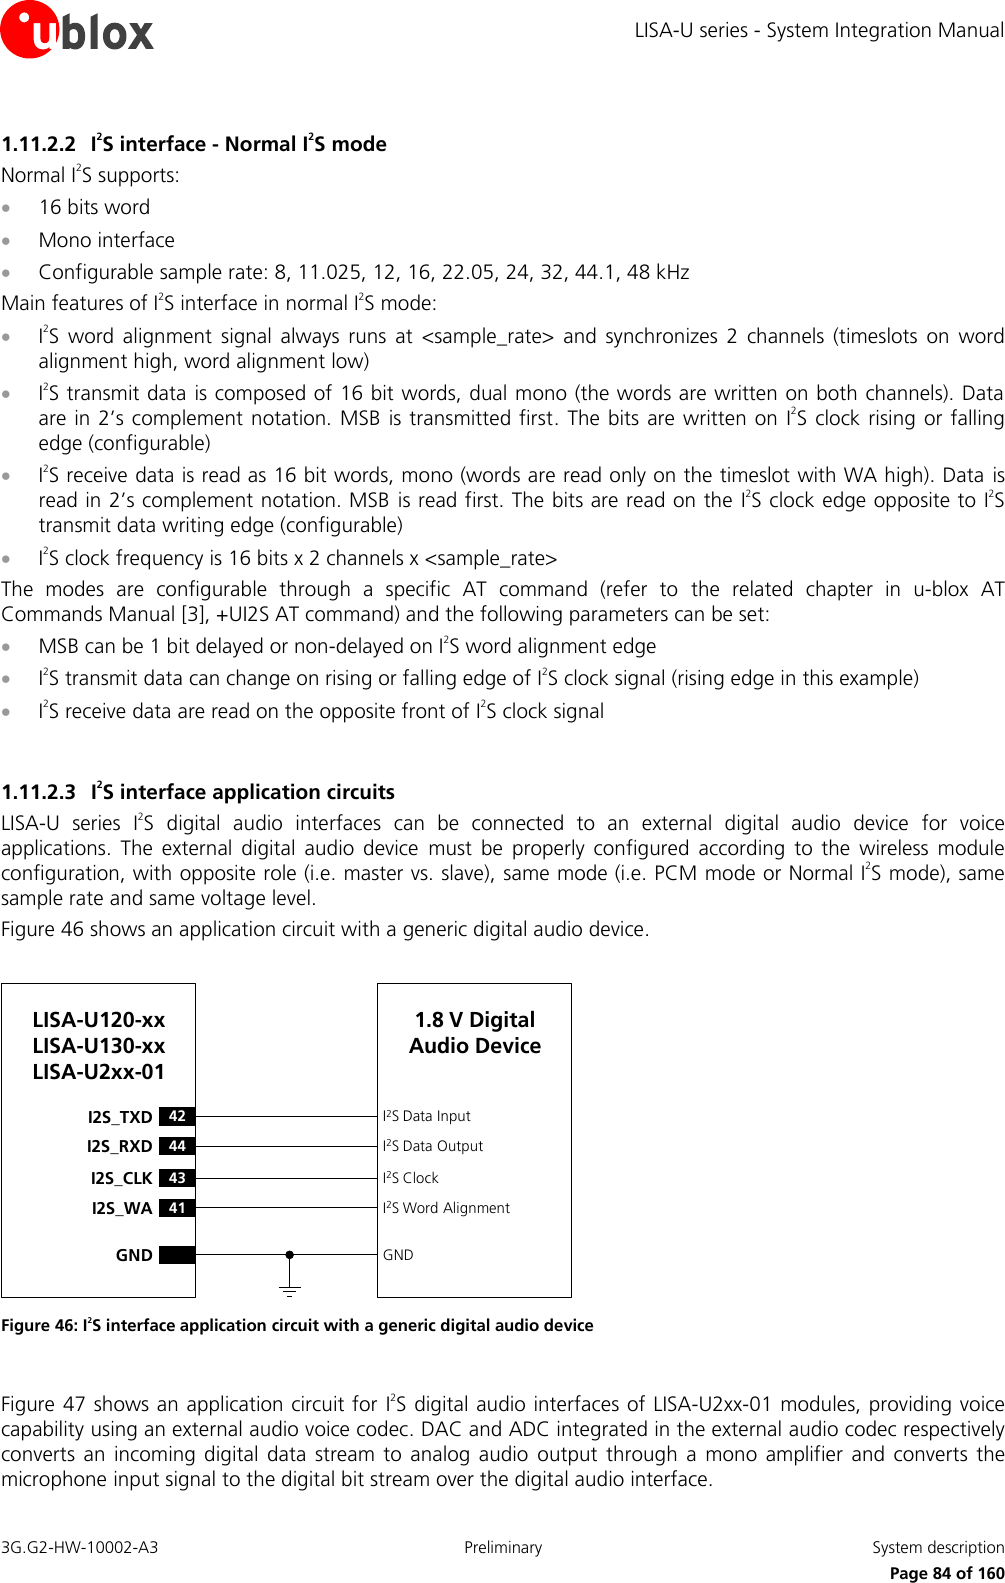 LISA-U series - System Integration Manual 3G.G2-HW-10002-A3  Preliminary  System description      Page 84 of 160 1.11.2.2 I2S interface - Normal I2S mode Normal I2S supports:  16 bits word  Mono interface  Configurable sample rate: 8, 11.025, 12, 16, 22.05, 24, 32, 44.1, 48 kHz Main features of I2S interface in normal I2S mode:  I2S  word  alignment  signal  always  runs  at  &lt;sample_rate&gt;  and  synchronizes  2  channels  (timeslots  on  word alignment high, word alignment low)  I2S transmit data  is composed of 16 bit words, dual mono (the words are written on both channels). Data are in 2’s complement notation. MSB  is transmitted  first. The bits are written on  I2S clock rising  or falling edge (configurable)  I2S receive data is read as 16 bit words, mono (words are read only on the timeslot with WA high). Data  is read in 2’s complement notation. MSB is read first. The bits are read on the  I2S clock edge opposite to I2S transmit data writing edge (configurable)  I2S clock frequency is 16 bits x 2 channels x &lt;sample_rate&gt; The  modes  are  configurable  through  a  specific  AT  command  (refer  to  the  related  chapter  in  u-blox  AT Commands Manual [3], +UI2S AT command) and the following parameters can be set:  MSB can be 1 bit delayed or non-delayed on I2S word alignment edge  I2S transmit data can change on rising or falling edge of I2S clock signal (rising edge in this example)  I2S receive data are read on the opposite front of I2S clock signal  1.11.2.3 I2S interface application circuits LISA-U  series  I2S  digital  audio  interfaces  can  be  connected  to  an  external  digital  audio  device  for  voice applications.  The  external  digital  audio  device  must  be  properly  configured  according  to  the  wireless  module configuration, with opposite role (i.e. master vs. slave), same mode (i.e. PCM mode or Normal I2S mode), same sample rate and same voltage level. Figure 46 shows an application circuit with a generic digital audio device.  43I2S_CLK41I2S_WAI2S ClockI2S Word AlignmentLISA-U120-xxLISA-U130-xxLISA-U2xx-0142I2S_TXD44I2S_RXDI2S Data InputI2S Data OutputGND GND1.8 V Digital Audio Device Figure 46: I2S interface application circuit with a generic digital audio device  Figure 47 shows an application circuit for  I2S digital audio interfaces of LISA-U2xx-01 modules, providing voice capability using an external audio voice codec. DAC and ADC integrated in the external audio codec respectively converts  an  incoming digital  data stream to  analog  audio  output  through  a mono  amplifier  and converts  the microphone input signal to the digital bit stream over the digital audio interface. 